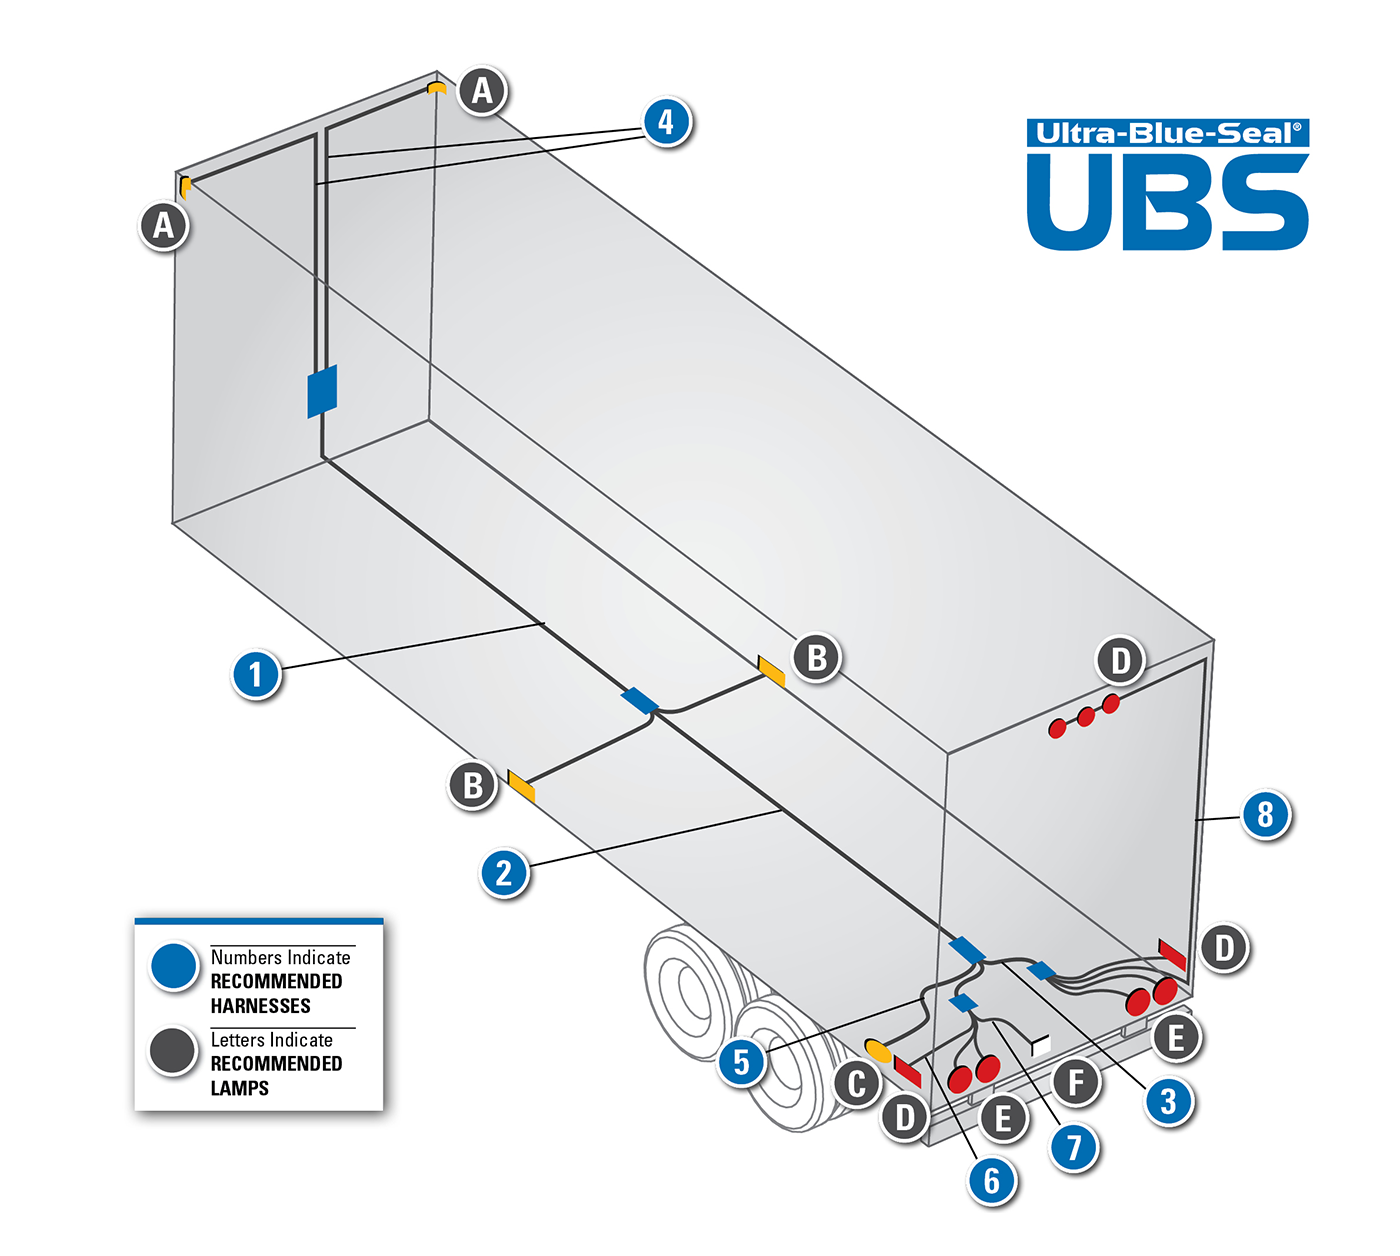 ULTRA-BLUE-SEAL® Wire Harness System | Grote Industries  Pickup Flatbed Tail Light Wiring Diagram    Grote Industries